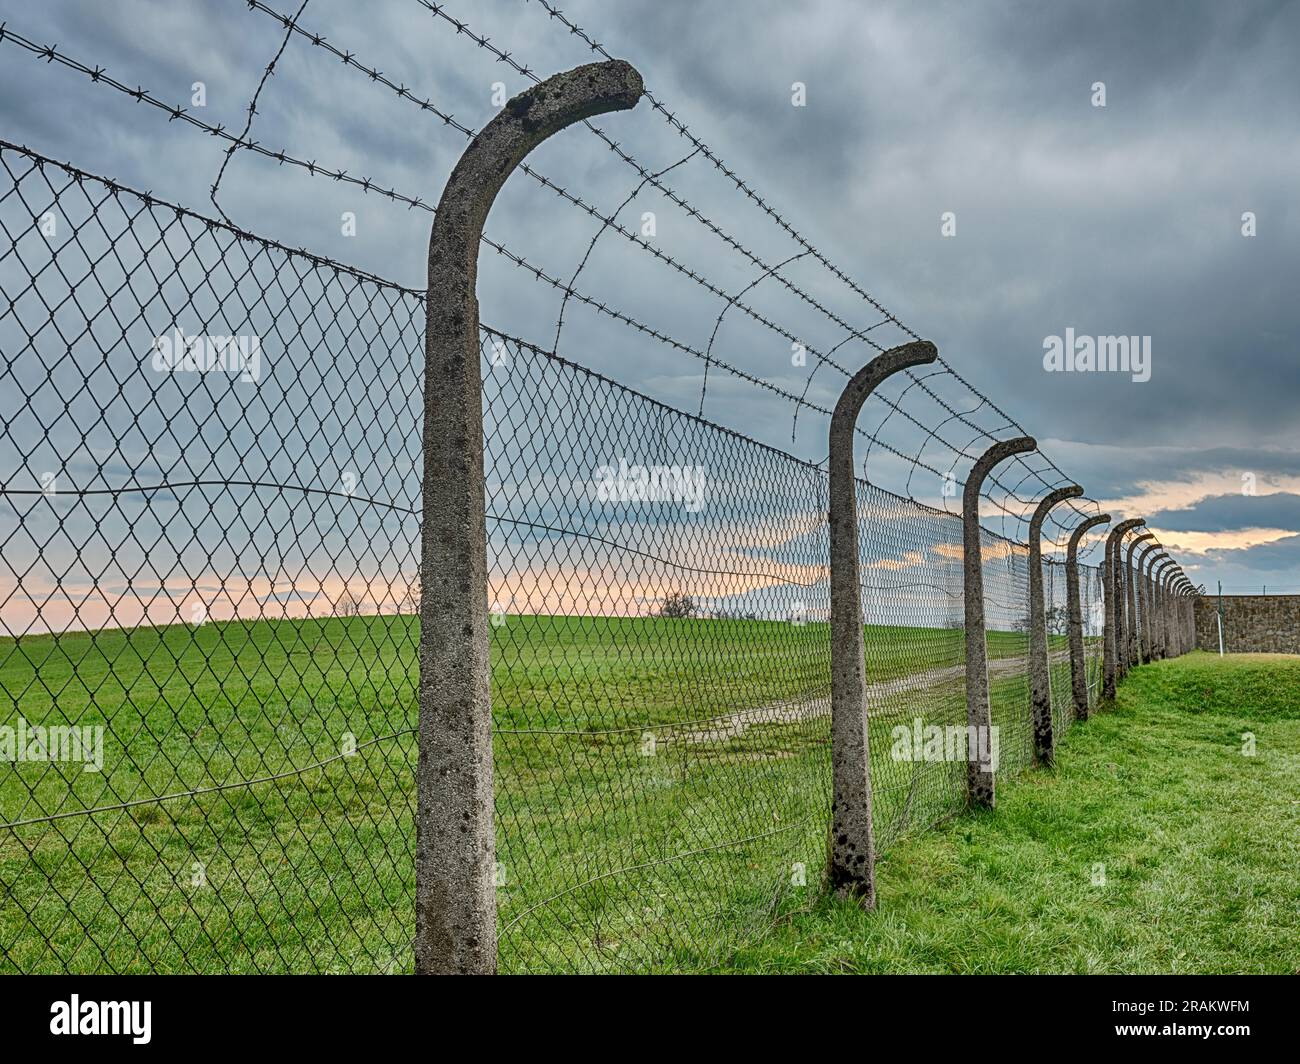 MAUTHAUSEN, AUSTRIA - DECEMBER 4, 2022: An electrified fence separated the barracks area from the countryside at the Mauthausen concentration camp in Stock Photo